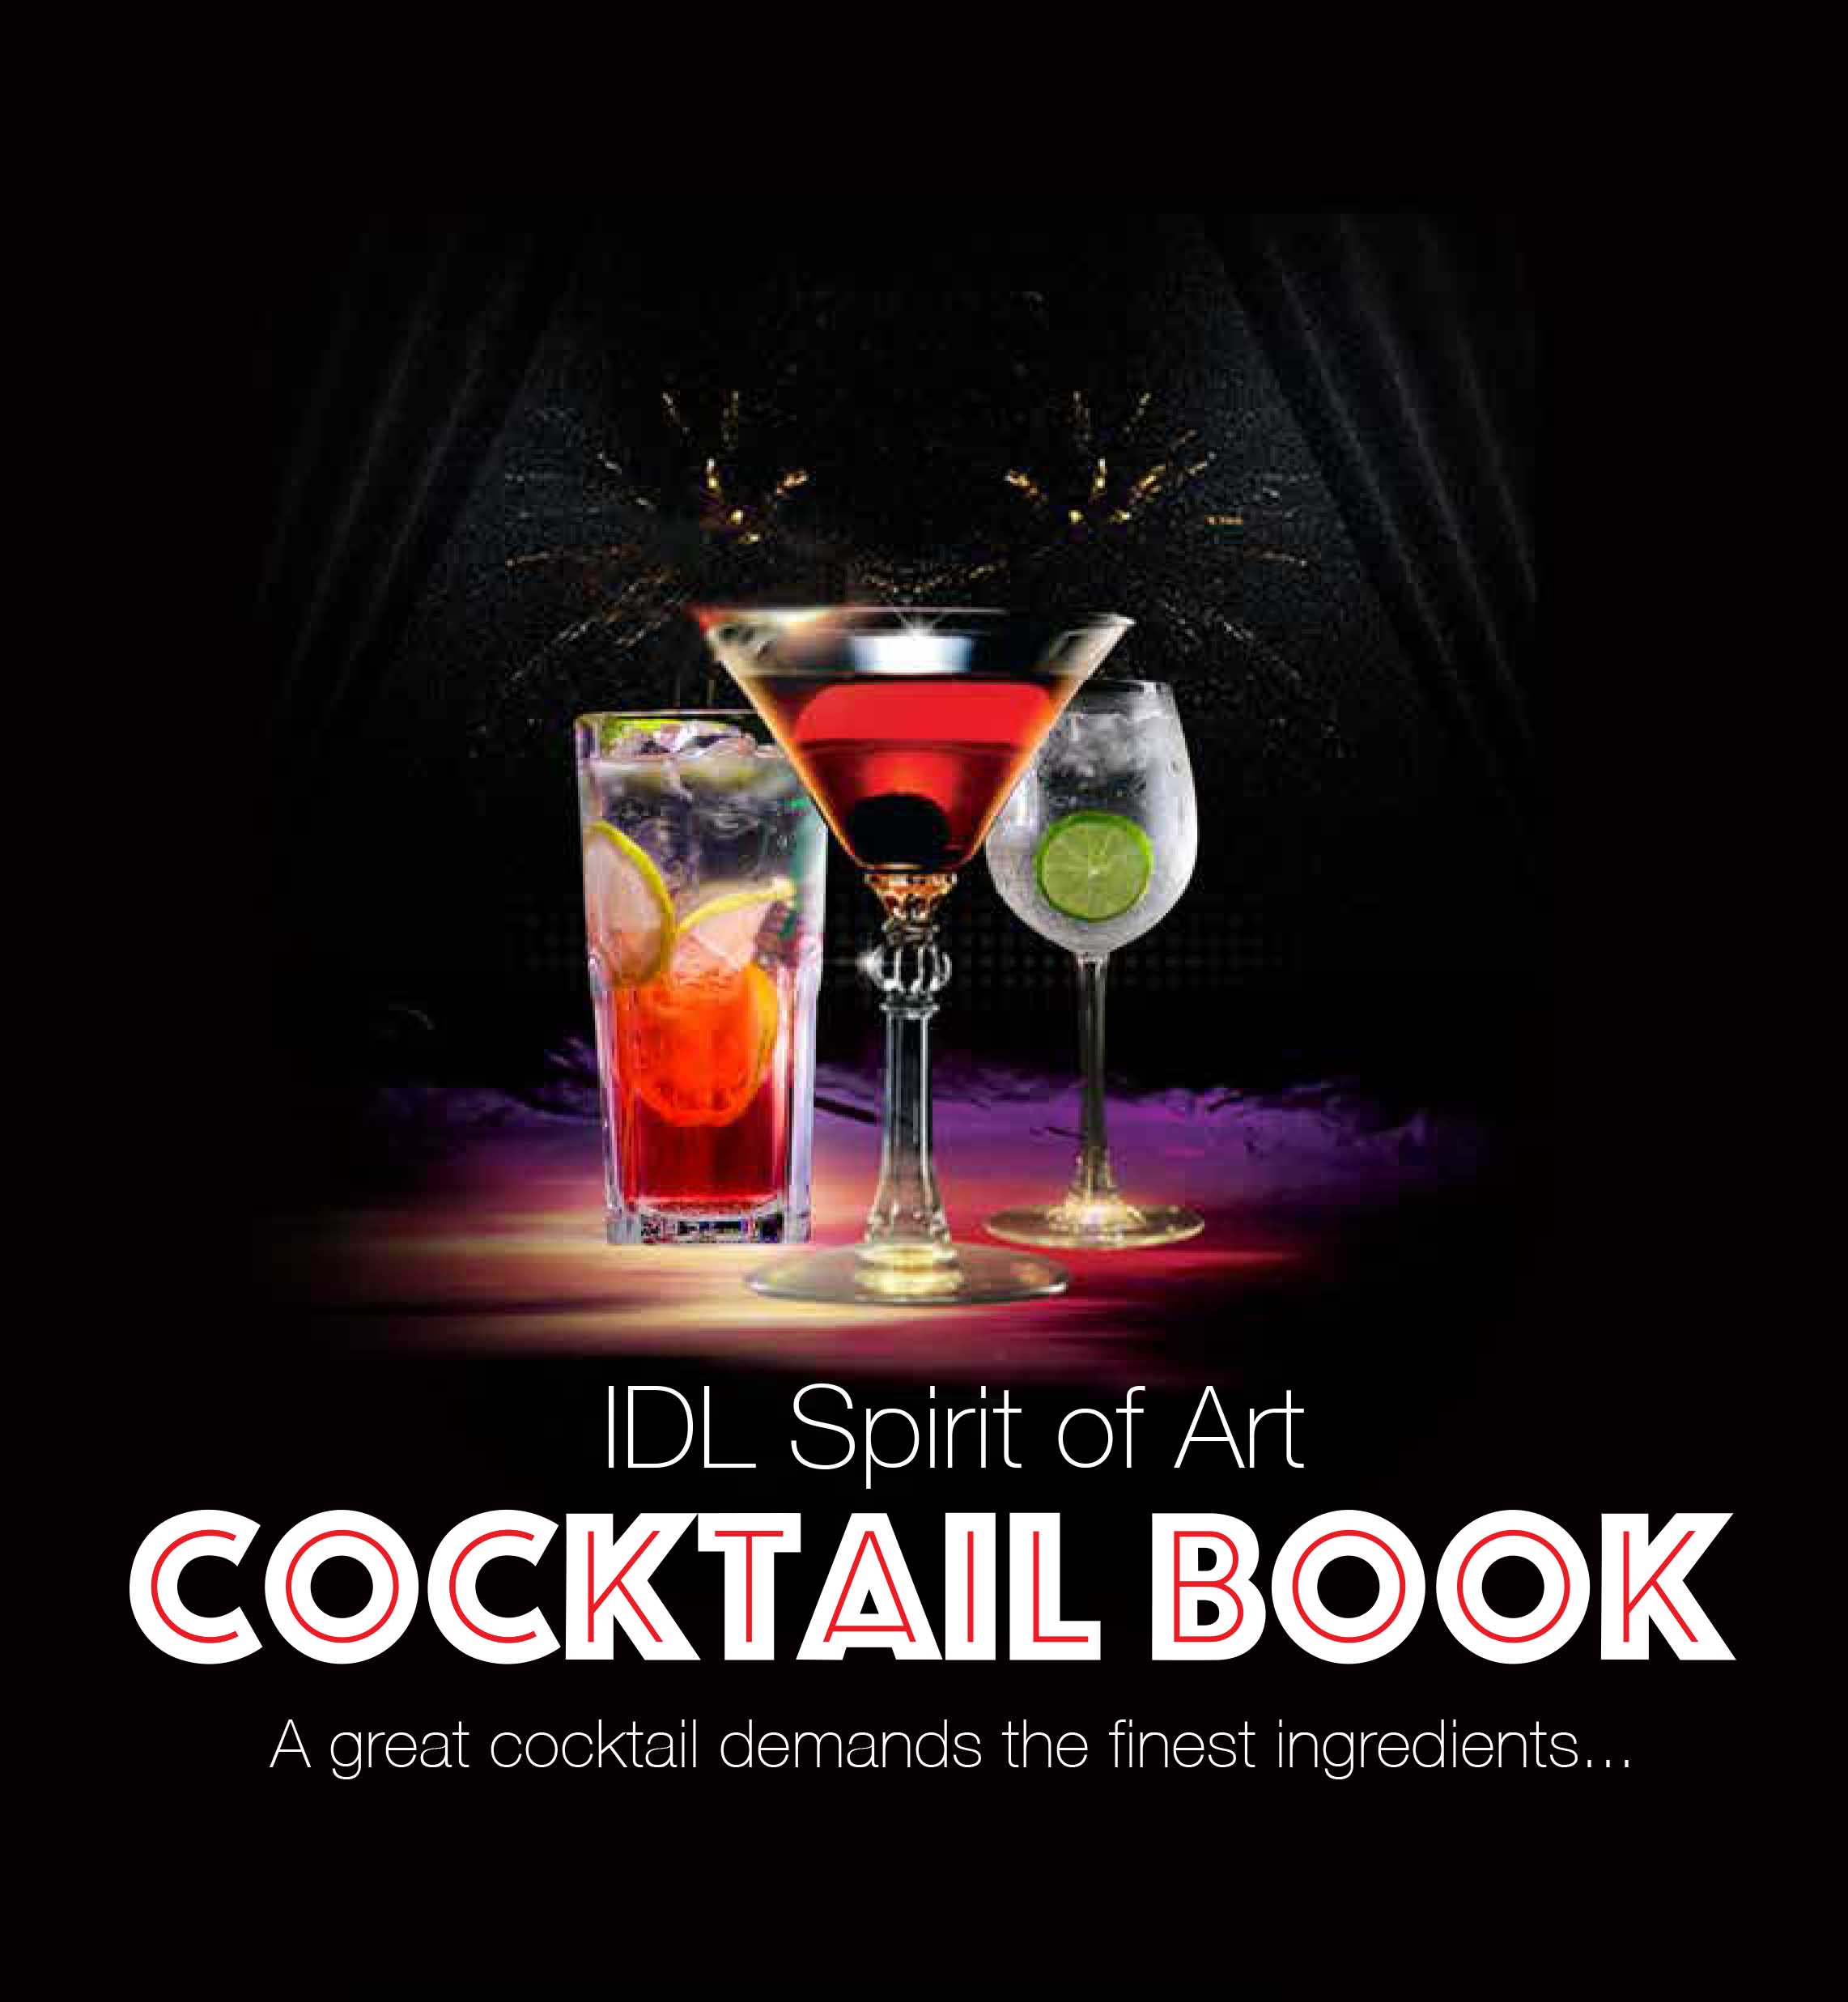 Free cocktail book